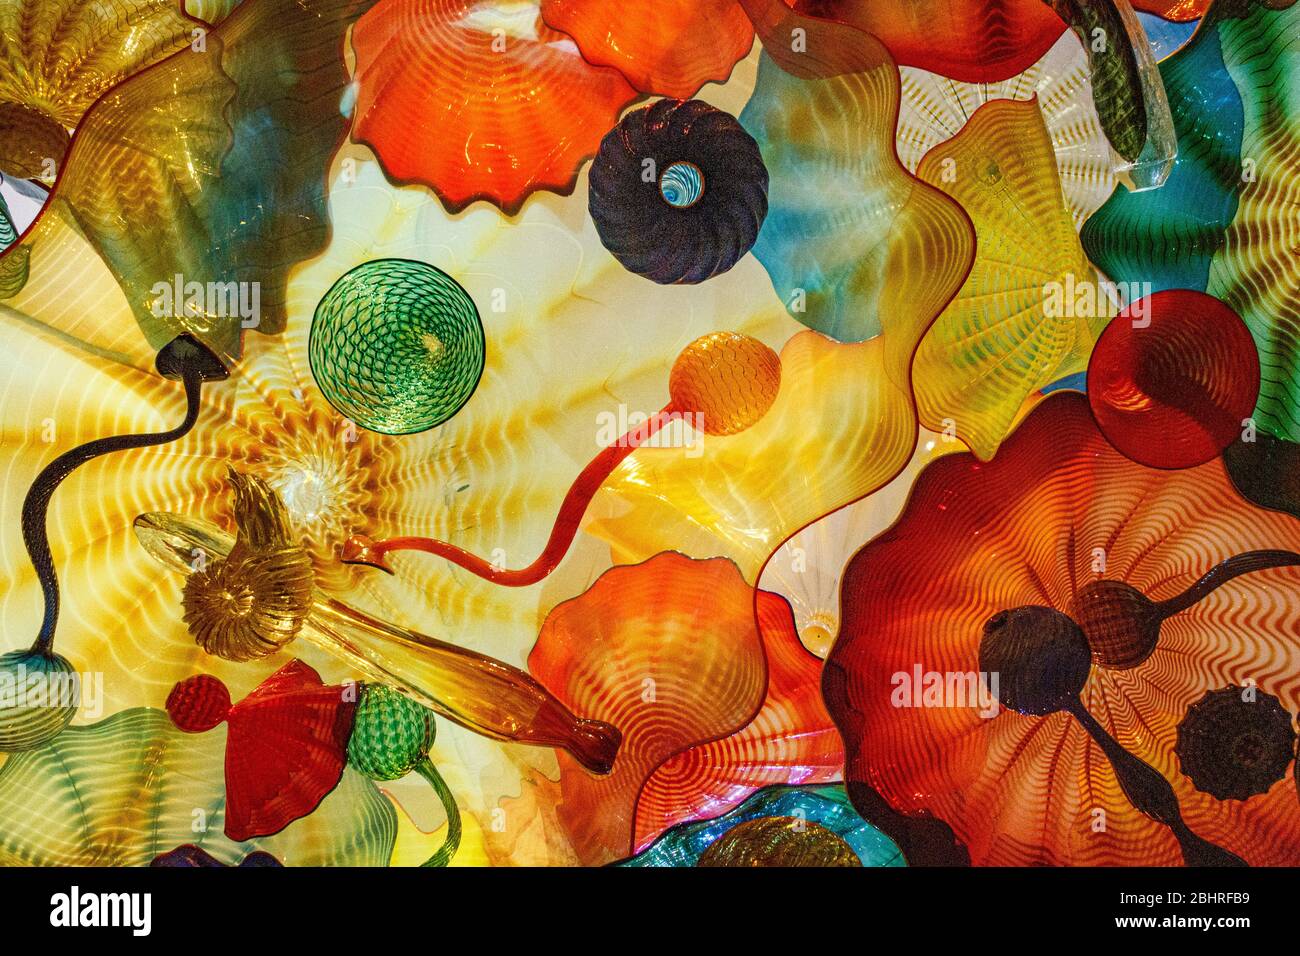 Chihuly Collection in St. Petersburg FL Stock Photo